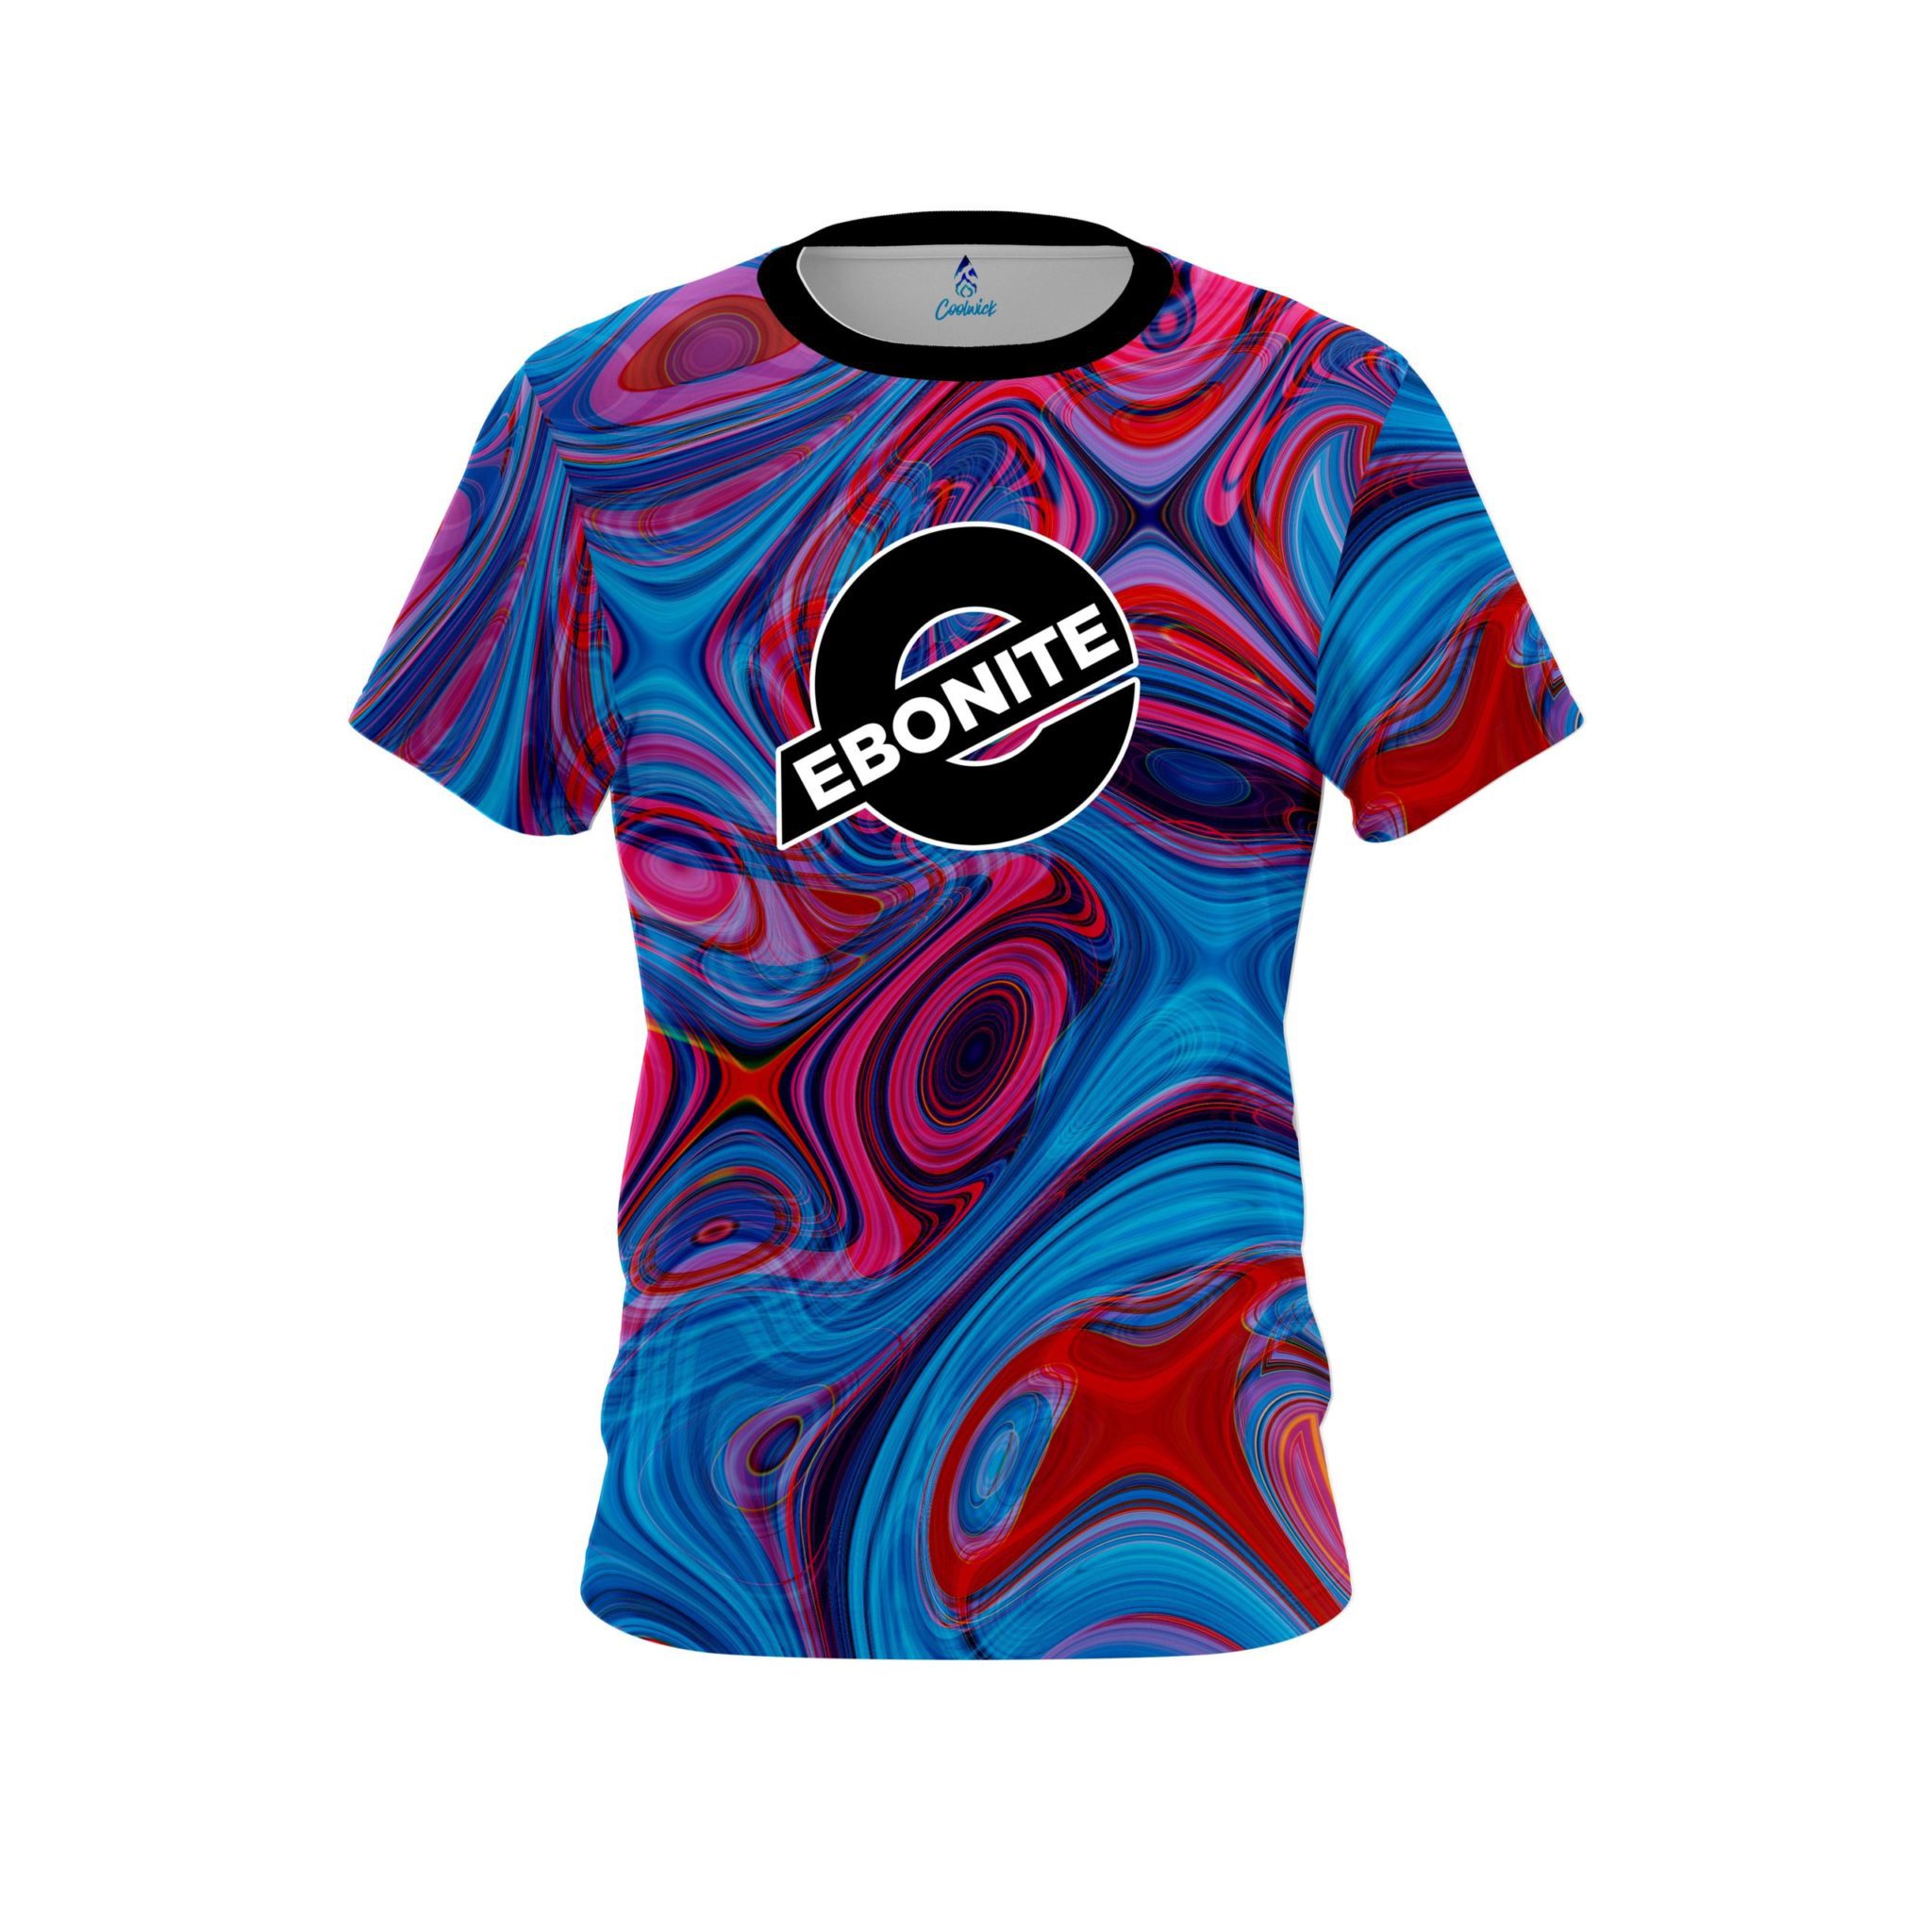 Ebonite Red Pink Hallucinate CoolWick Bowling Jersey